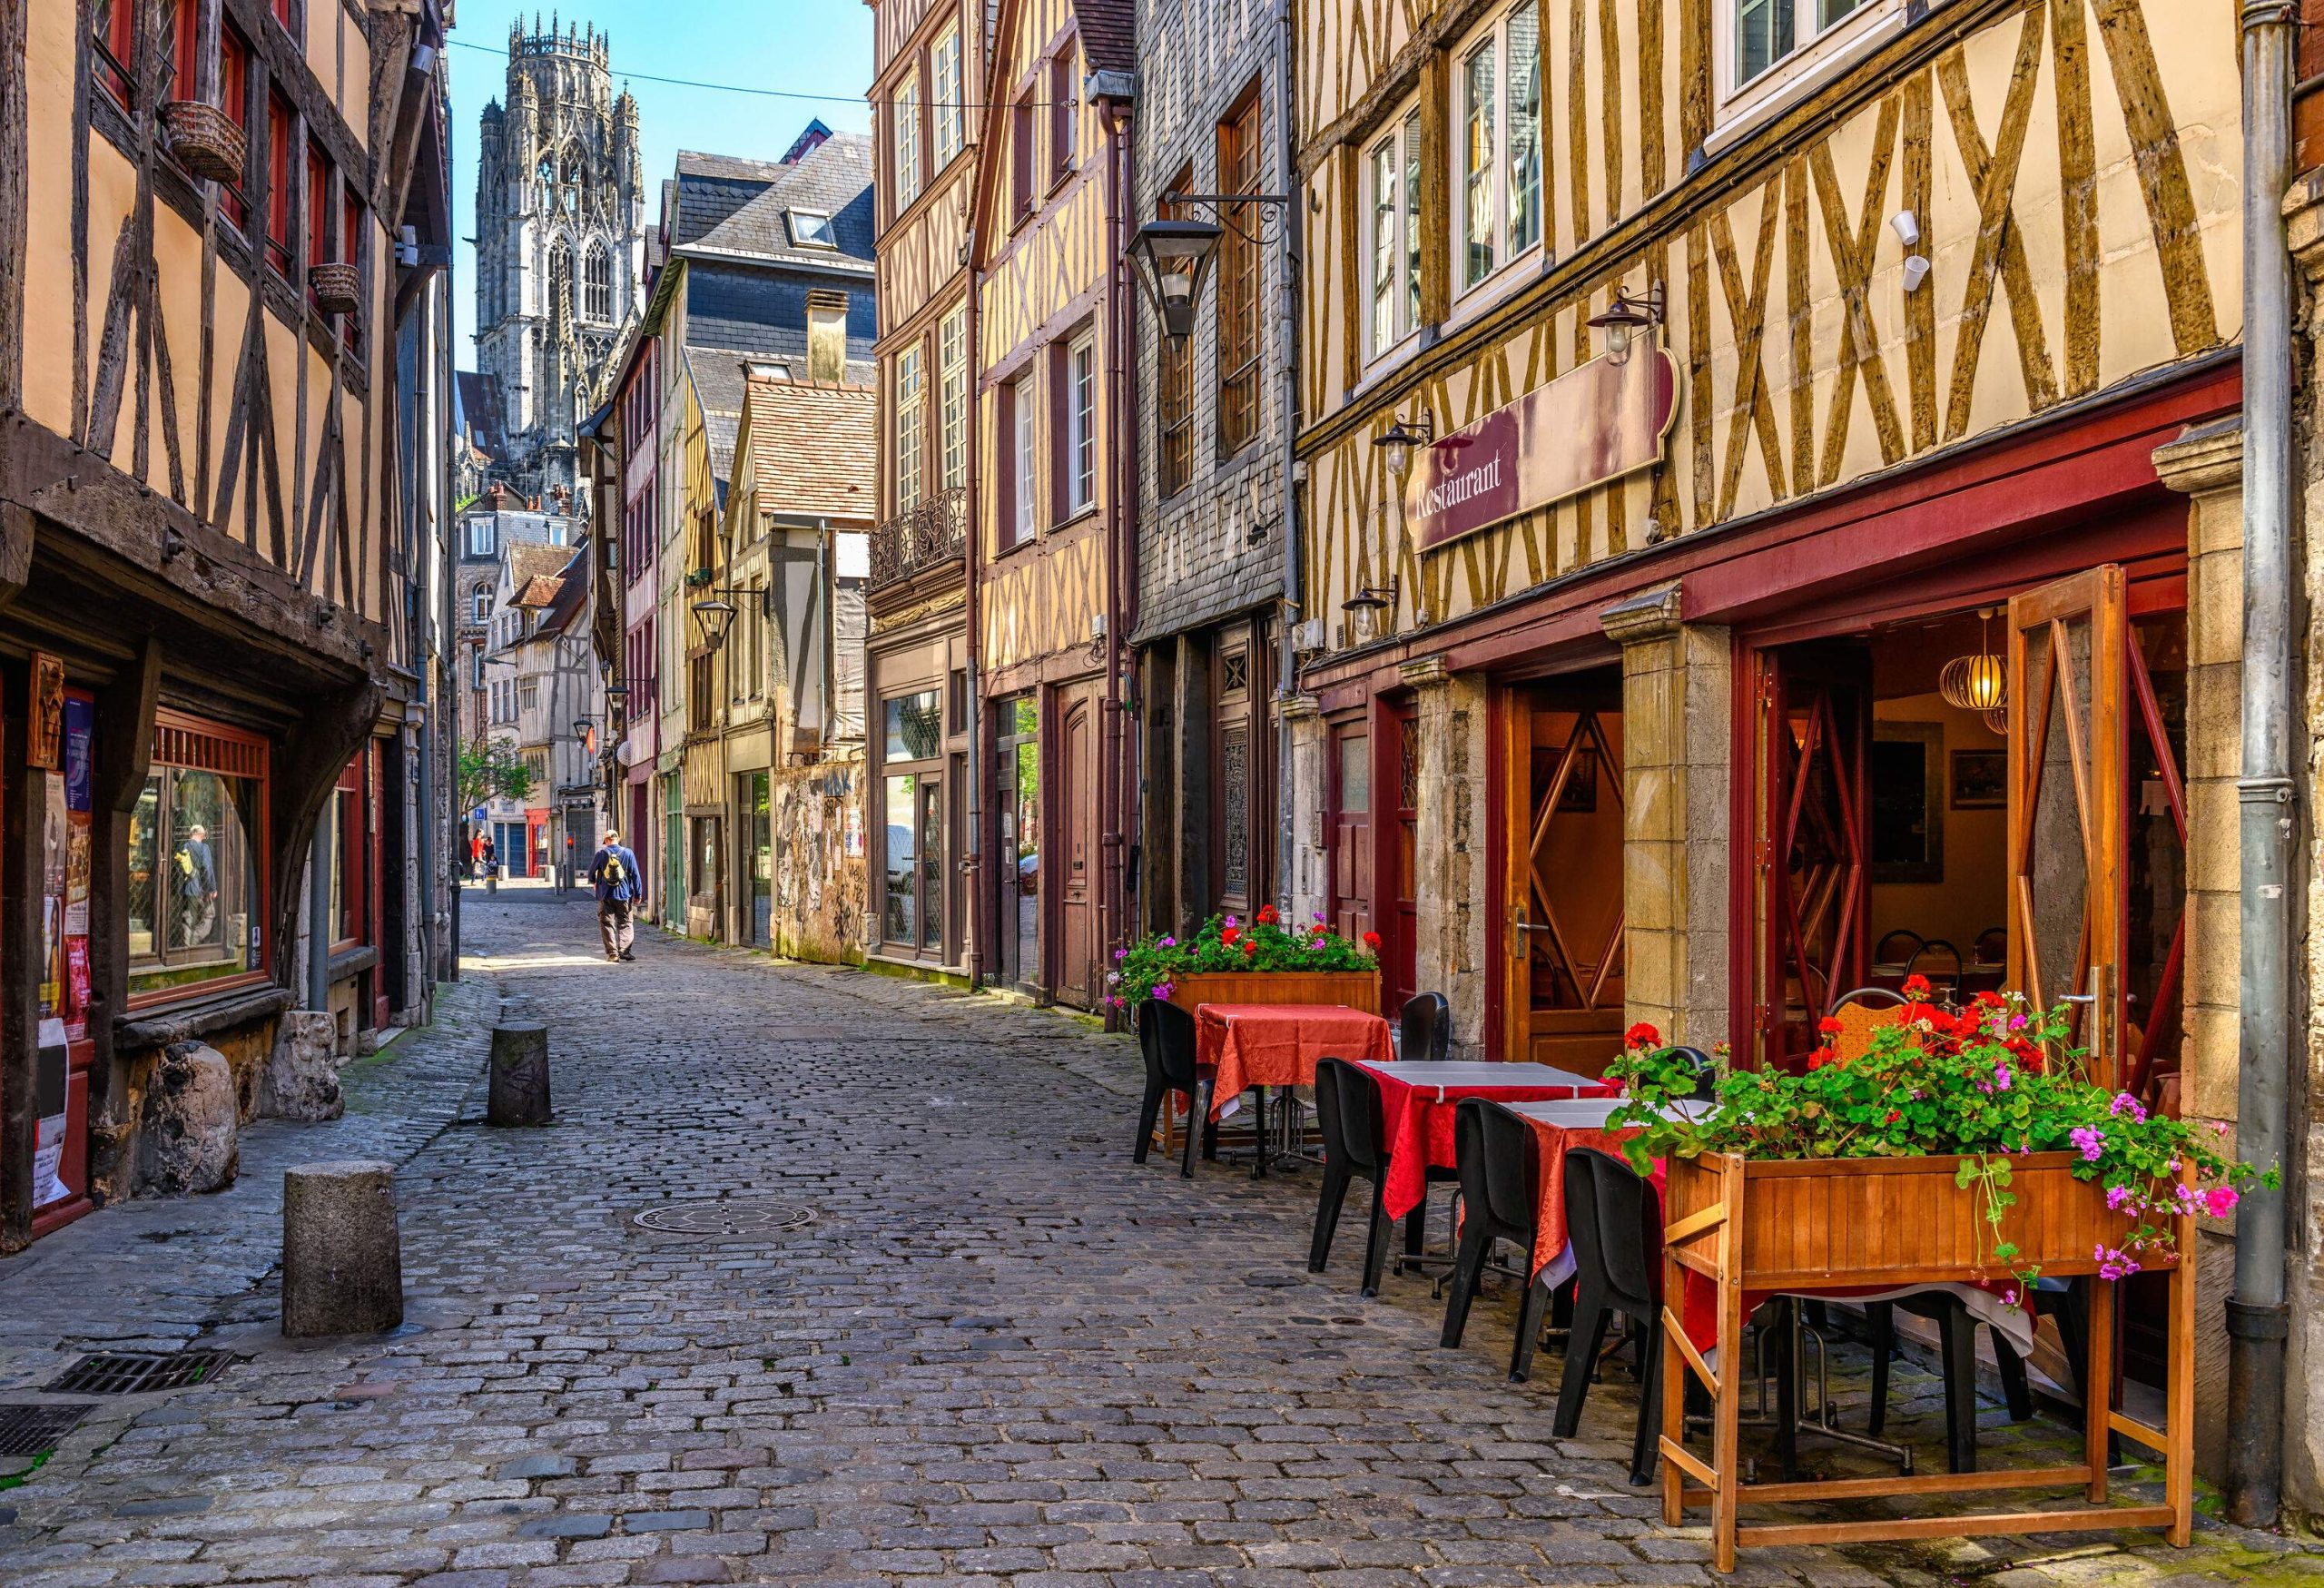 A man walking through a cozy cobbled street in the middle of traditional French half-timbered houses.